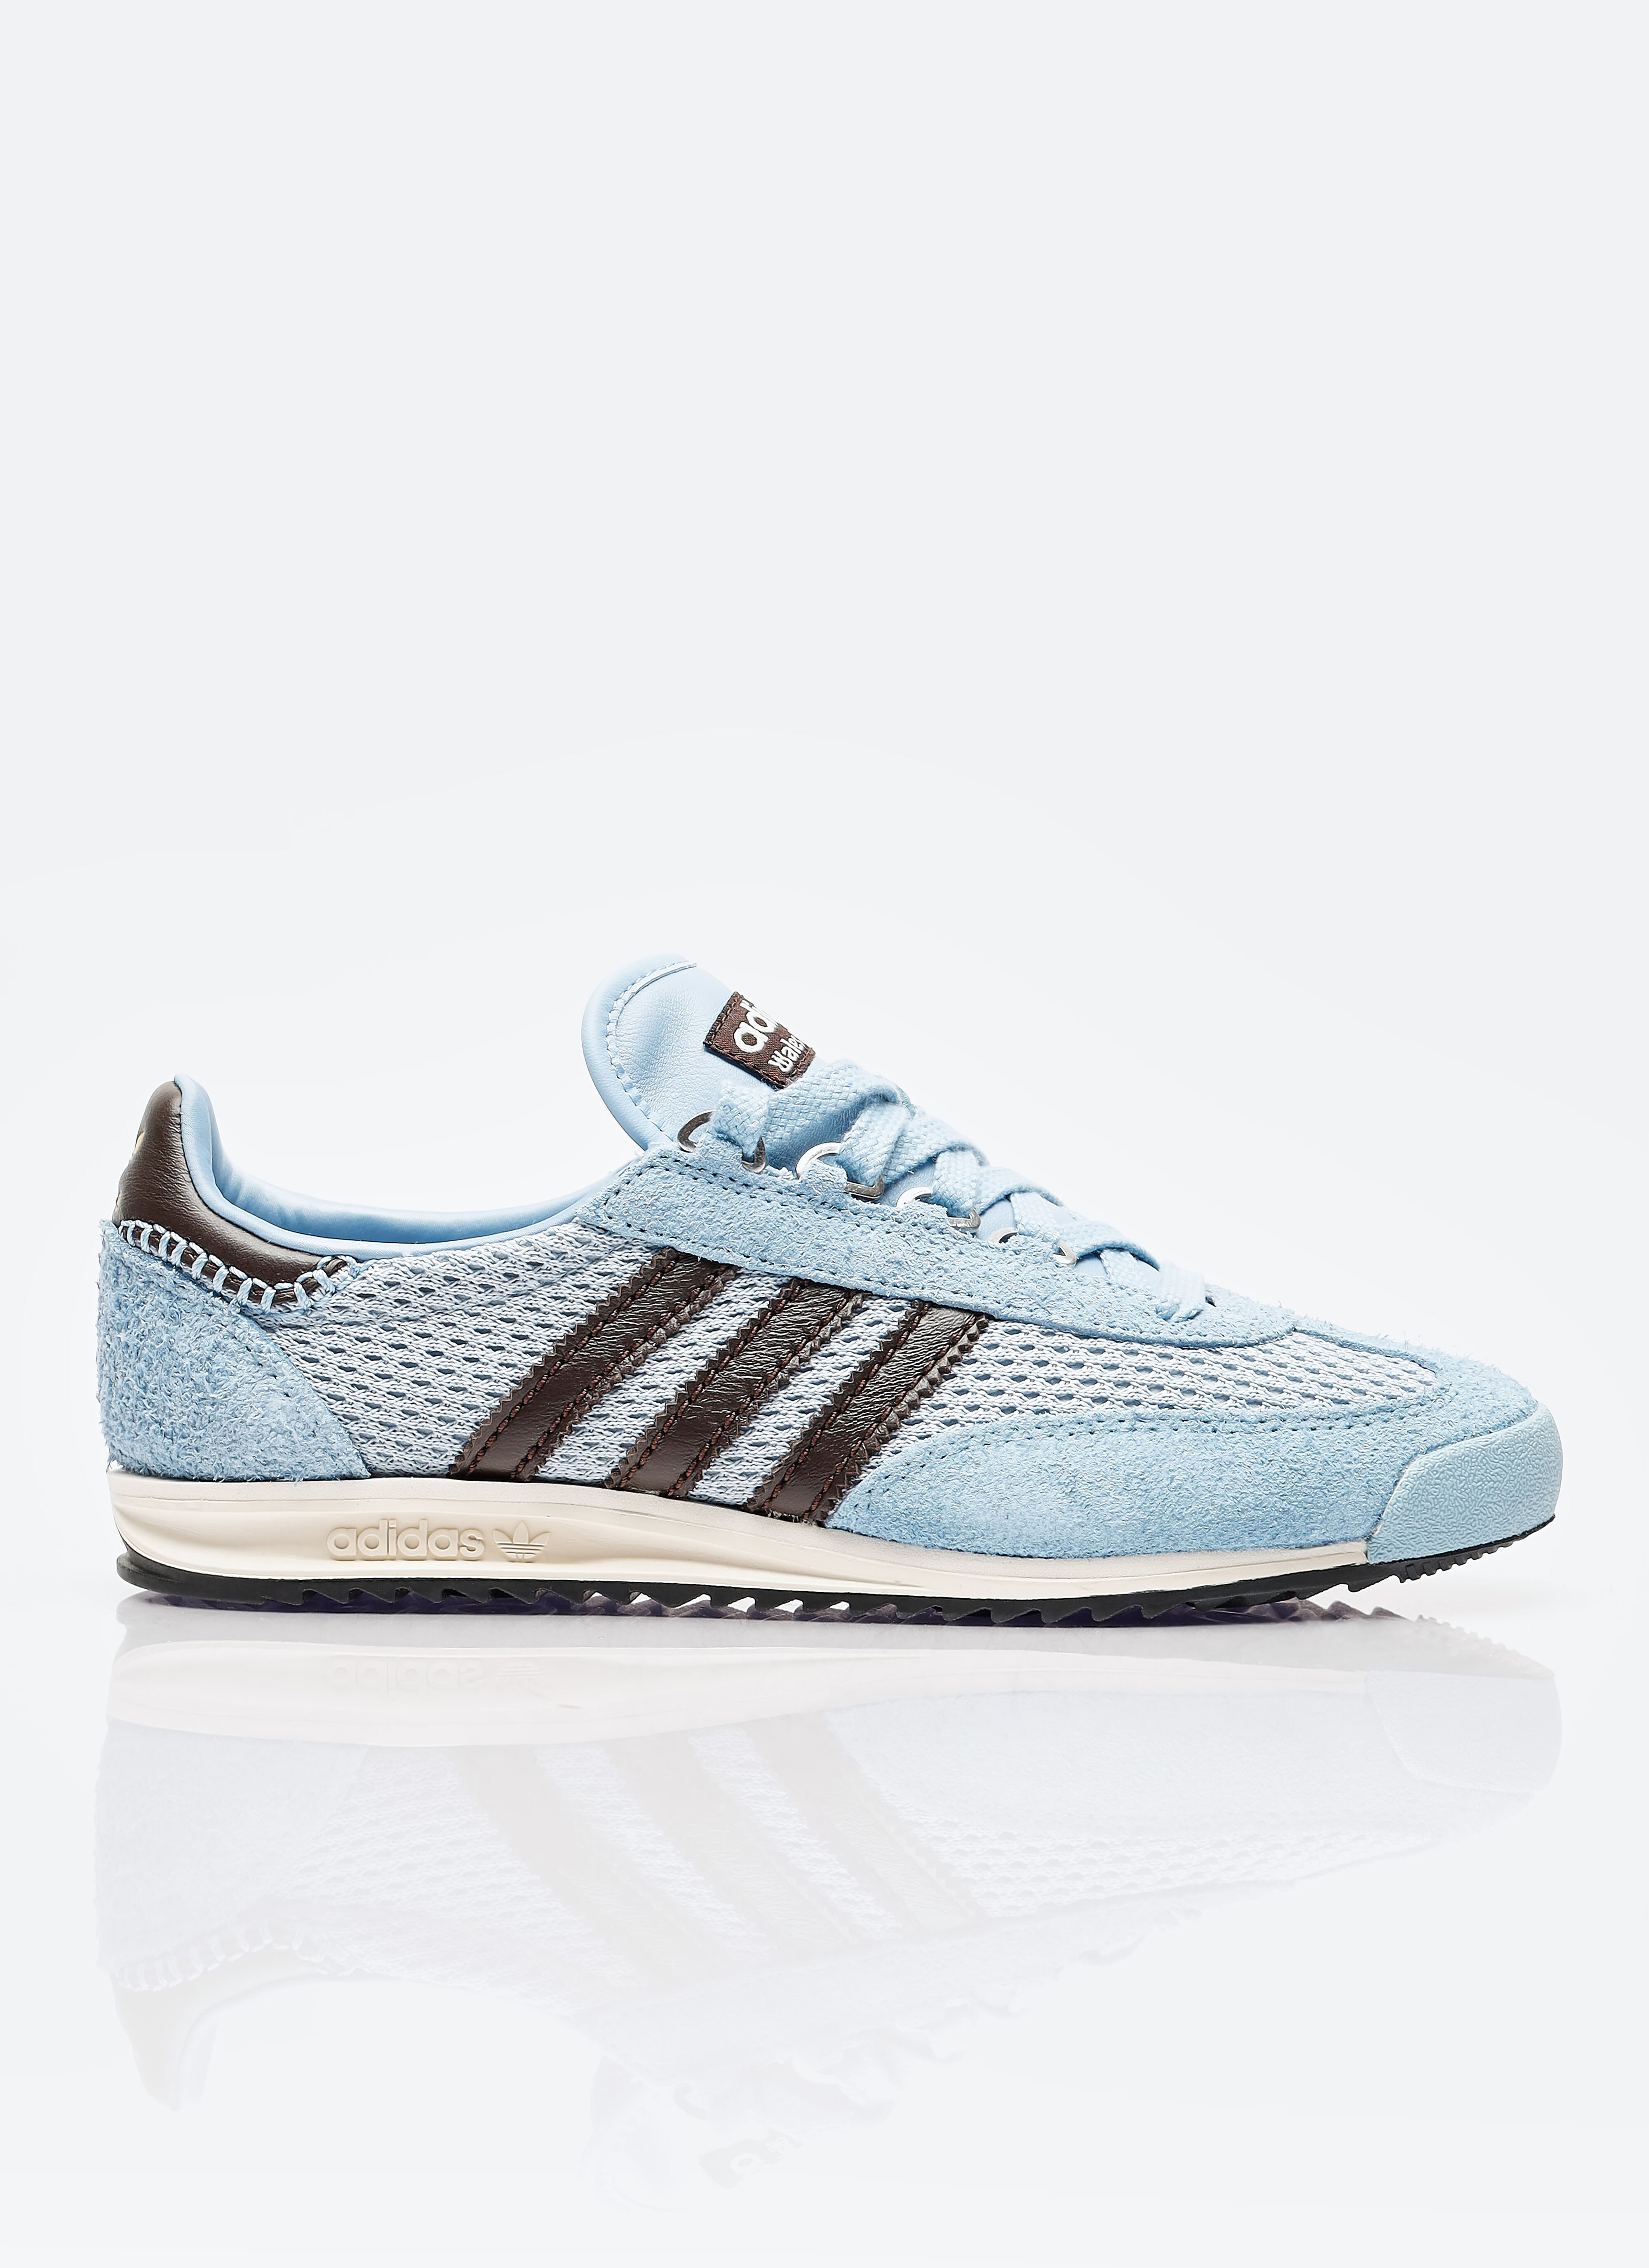 adidas by Wales Bonner SL76 Sneakers Green awb0357001